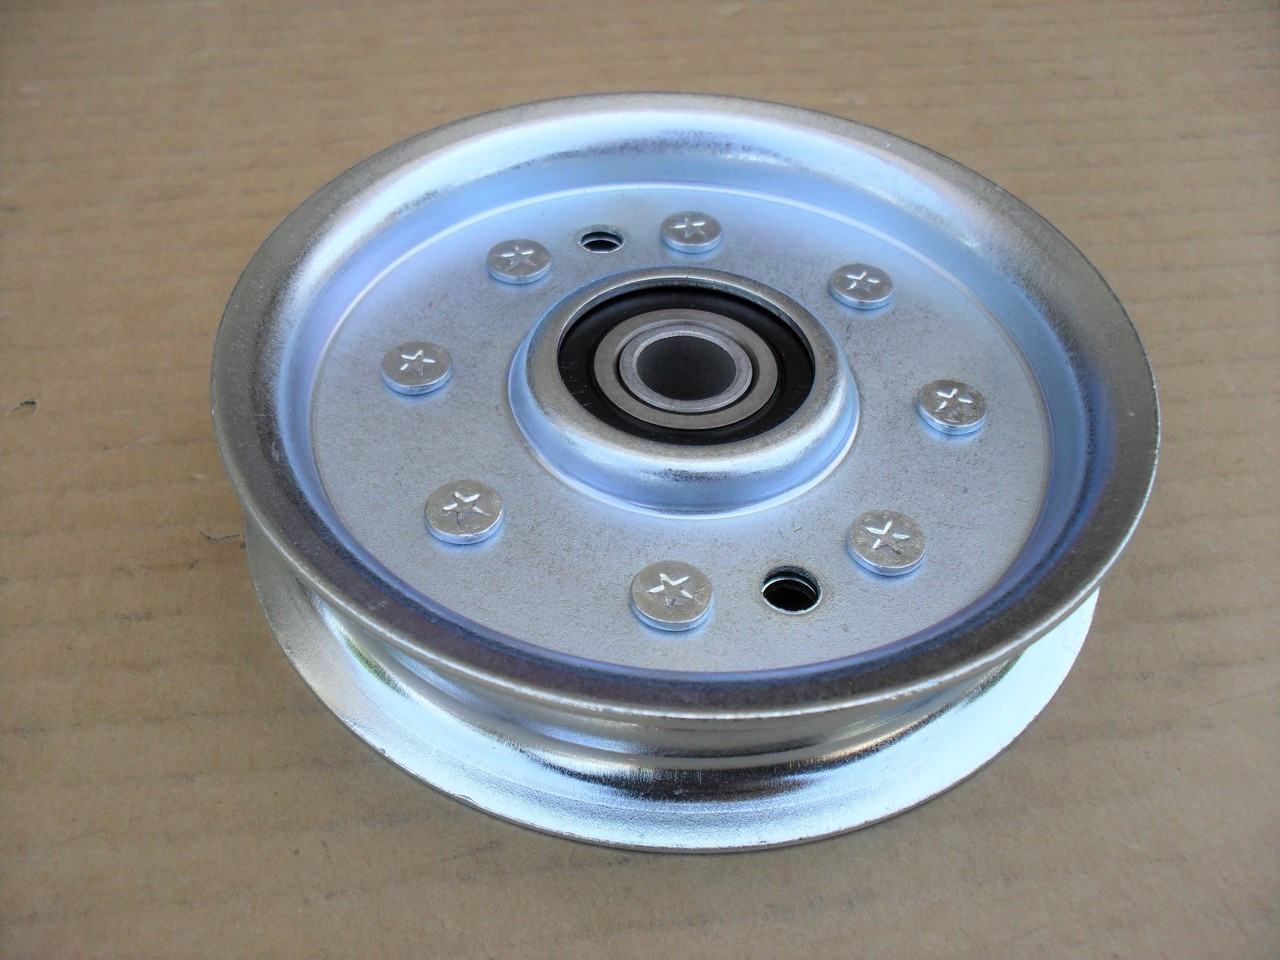 Flat Idler Pulley for Exmark Explorer 52", 60 Cut, Turf Tracer 32", 36", 48" Deck 1403009, 403009, 1-403009 OD: 4-5/8", ID: 1/2", Height: 1"